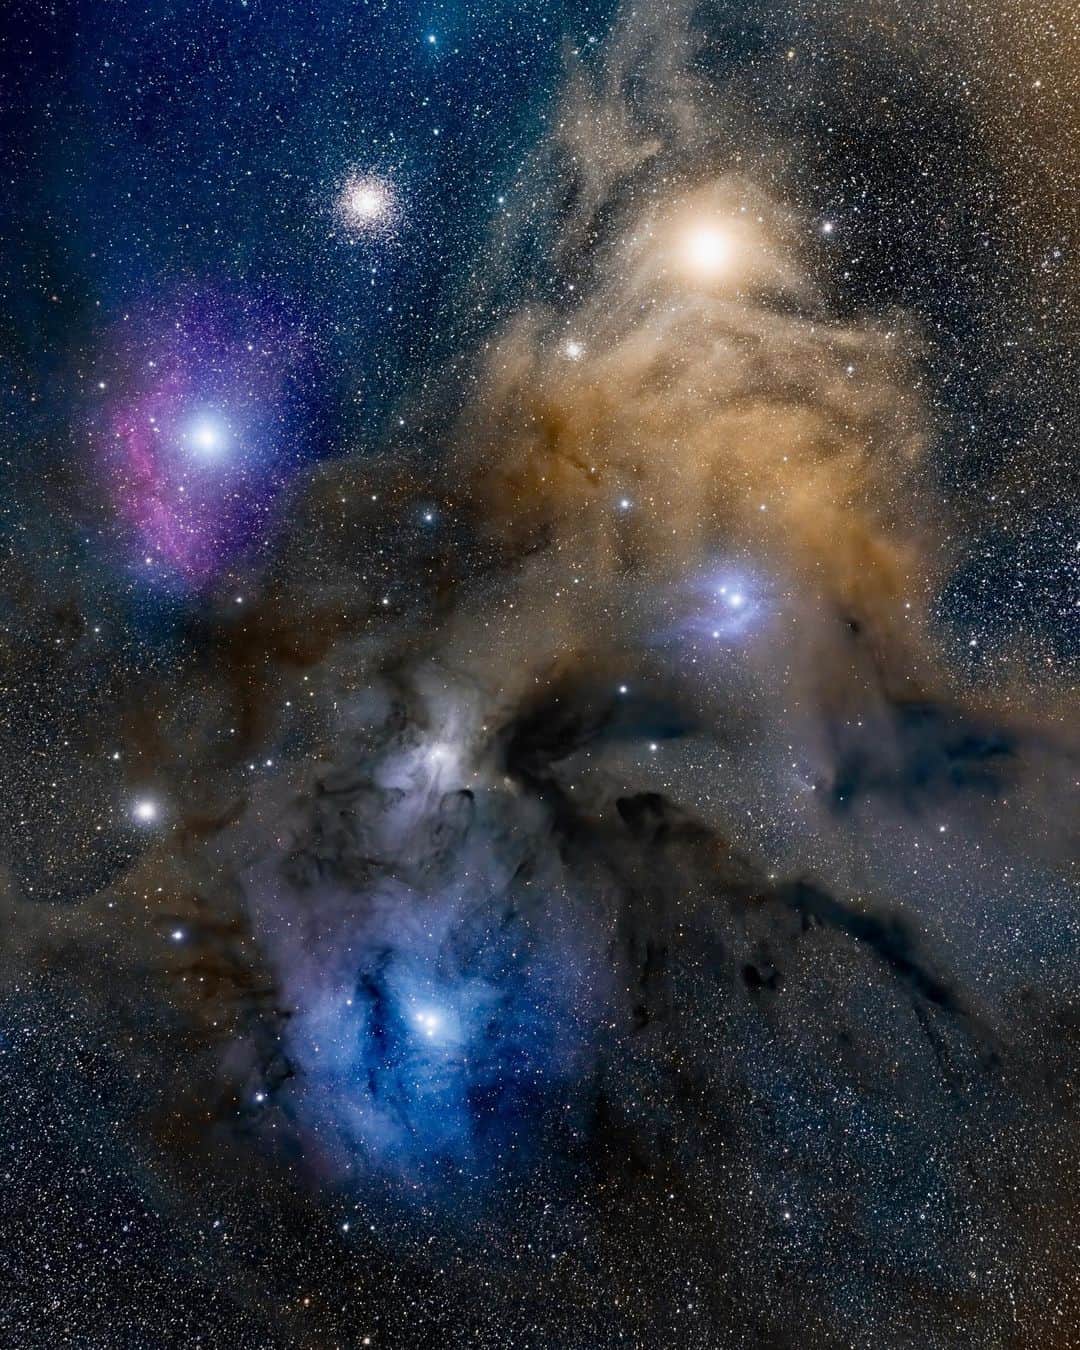 Travis Burkeのインスタグラム：「Exploring deeper into one of my favorite areas of the universe! ⠀ This is the ‘Rho Ophiuchi’ cloud complex. It’s a massive nebula of colorful cosmic dust and gas and is one of the closest place where new stars are born. If you swipe right, you can see a wide field view of where Rho is in the Milky Way galaxy.  ⠀ I’ve been fascinated by the dark arm that extends off of the Milky Way for as long as I can remember and I typically use it as a guide to judge my night sky images by how much definition I get in that area (because it’s only visible when there is very little light pollution).  ⠀ By combining the use of a telescope and the new @Fujifilmx_us medium format GFX 100 camera, which has a massive sensor that lets in more light in and has a higher dynamic range, I was able to capture more detail in the sky than I ever knew existed. ⠀ Huge thanks to Dustin (@gibsonpics) for continuing to help make these images possible and always encouraging me to look, and shoot, deeper into the universe!   #space #milkyway #opteam」